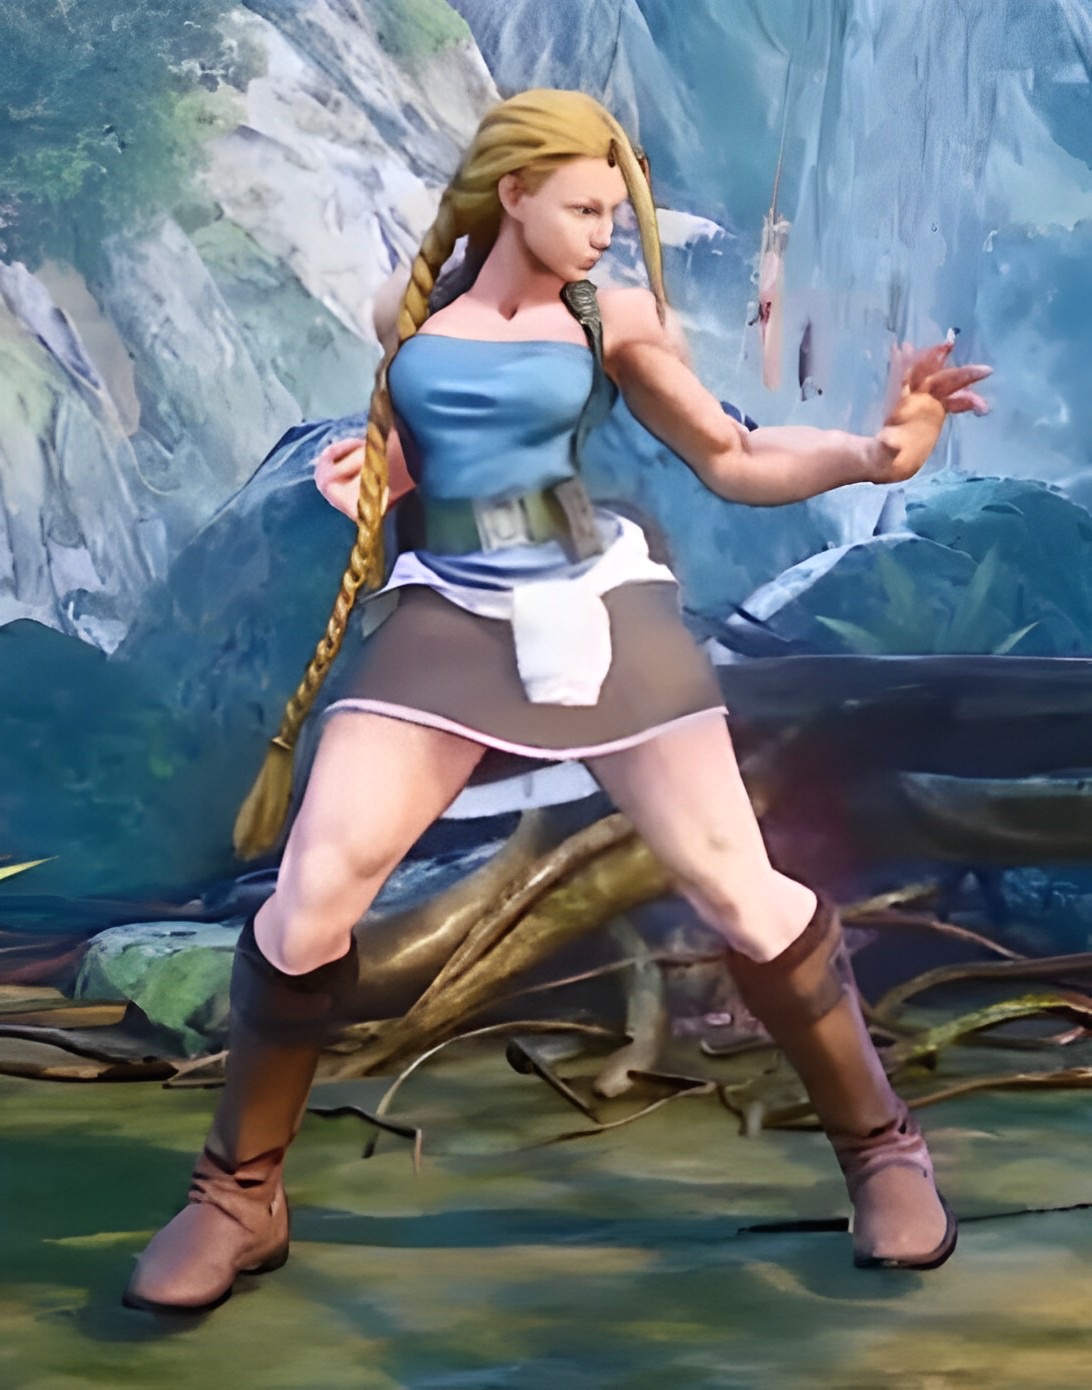 Cammy White [SF6] - SF6 outfit by zeneox on DeviantArt